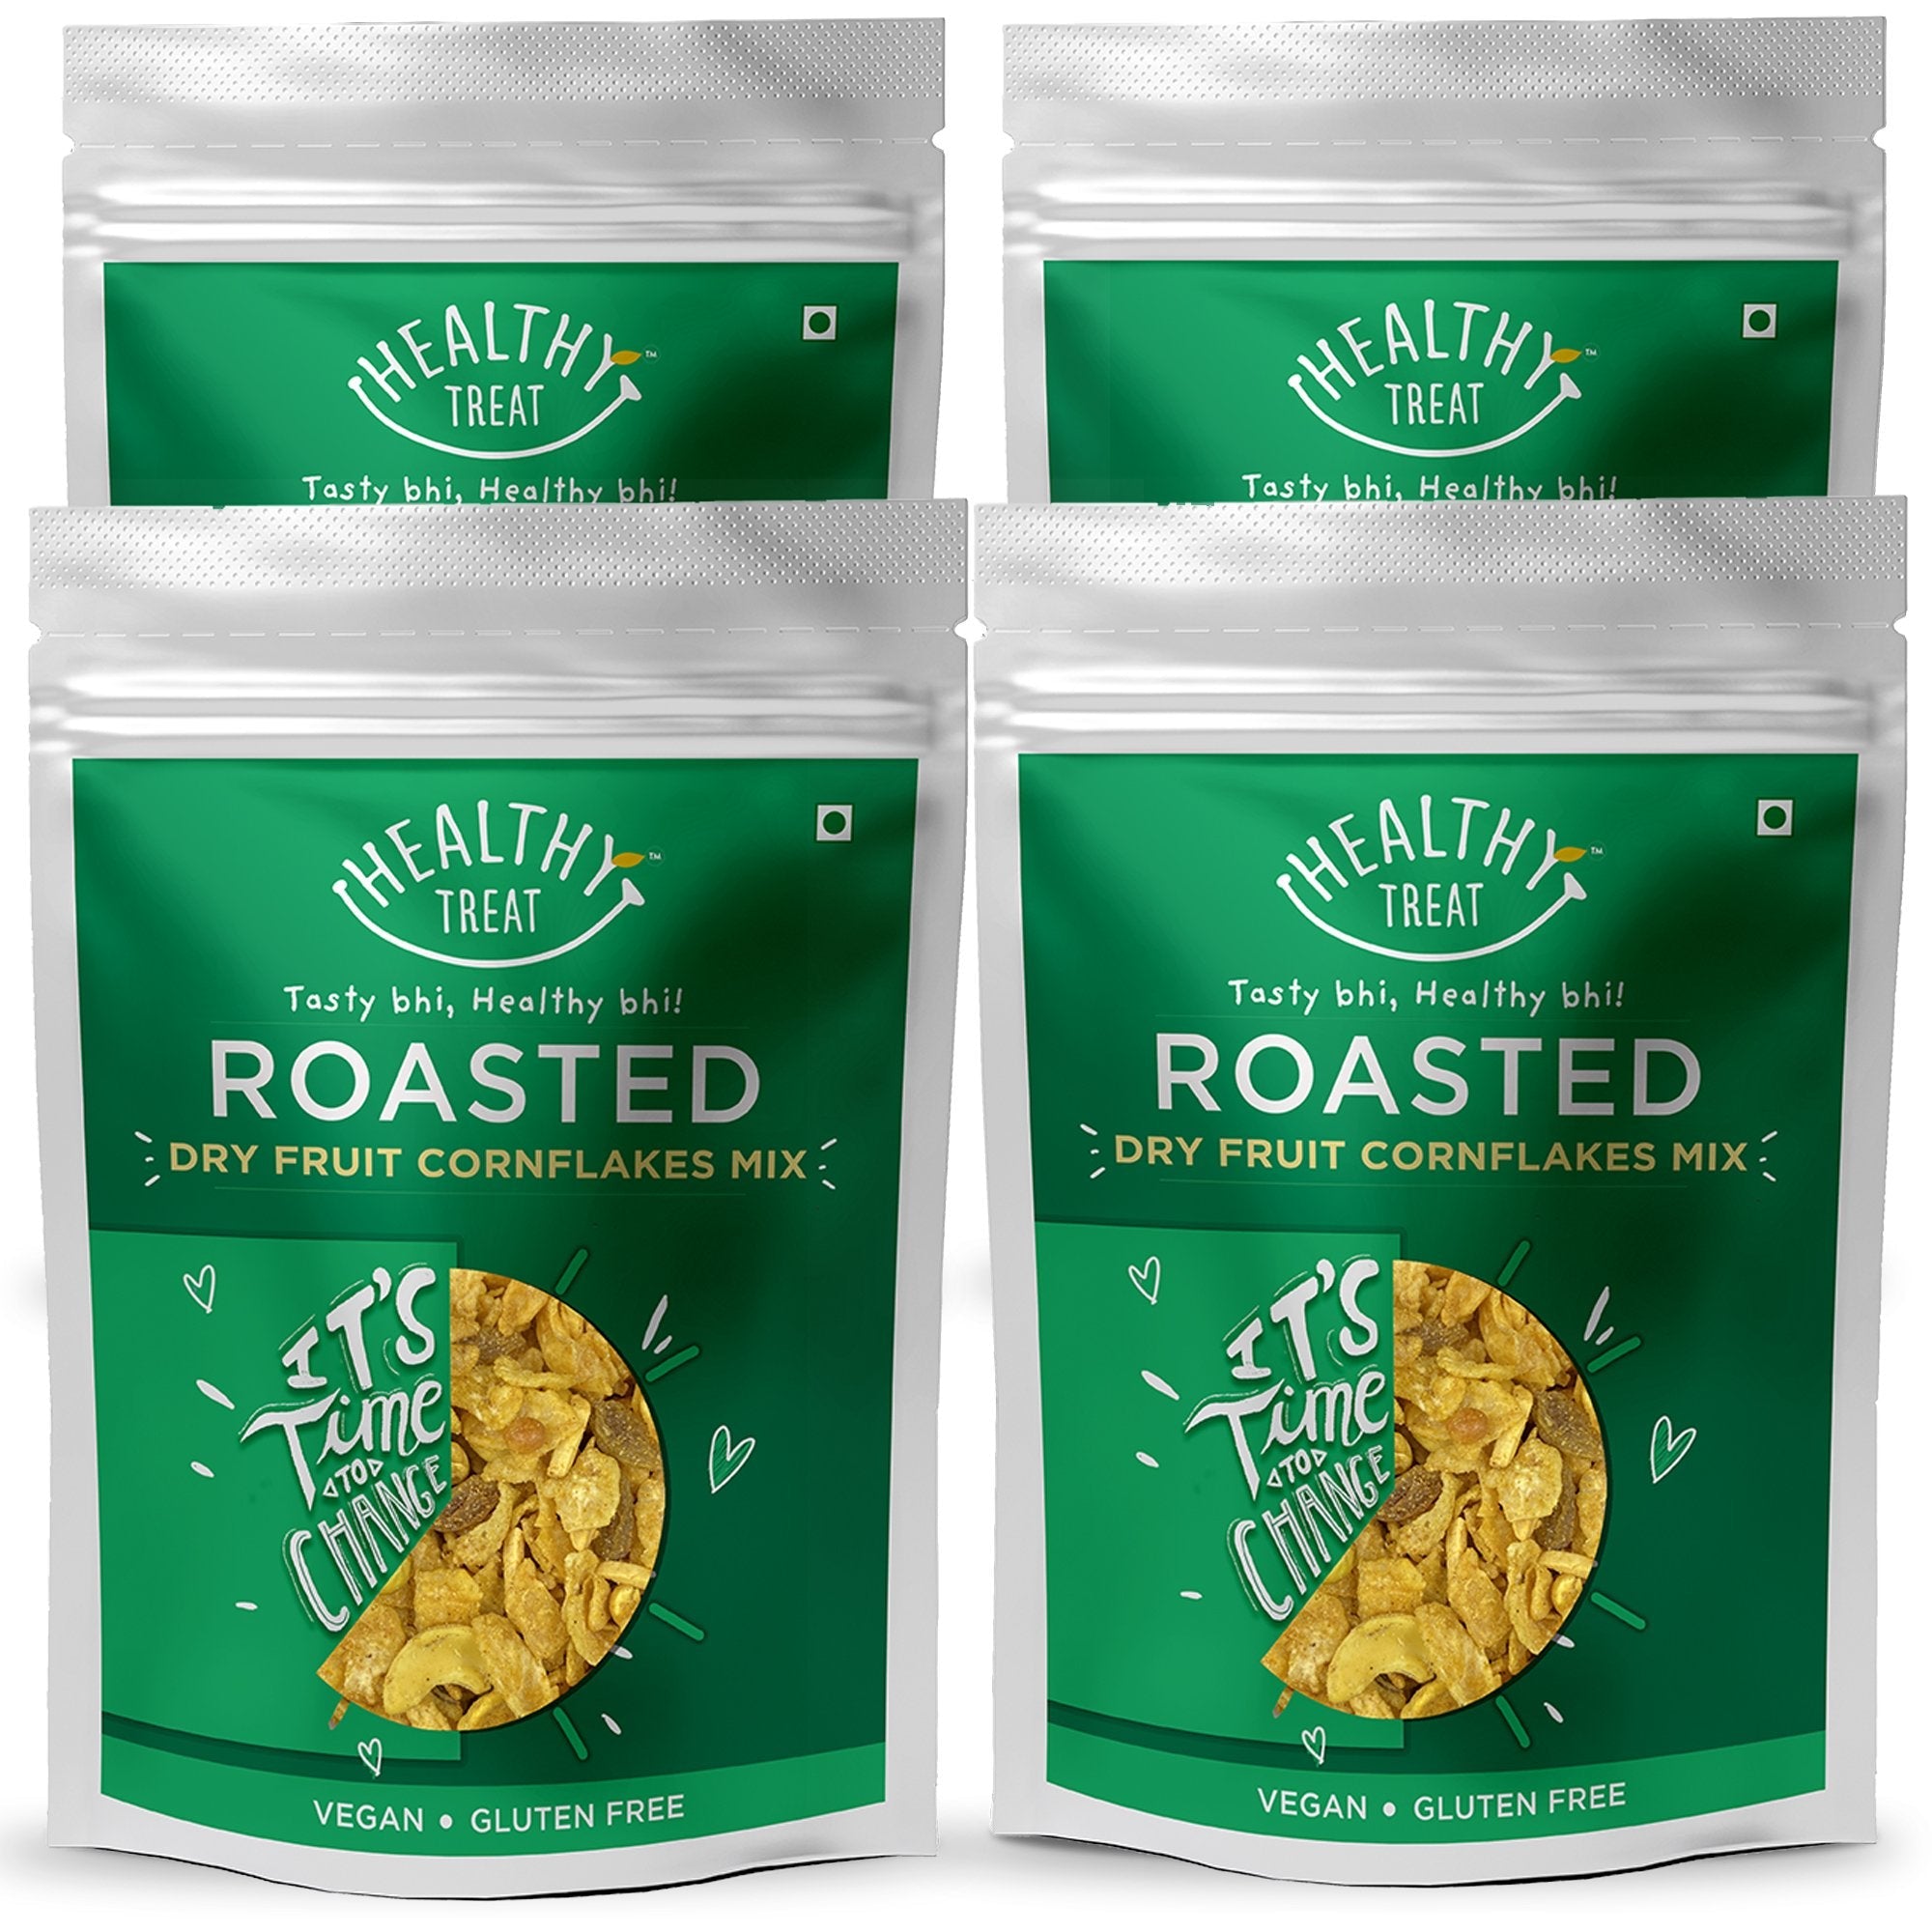 Healthy Treat Roasted Dry Fruit Cornflakes Mix 600 gm.